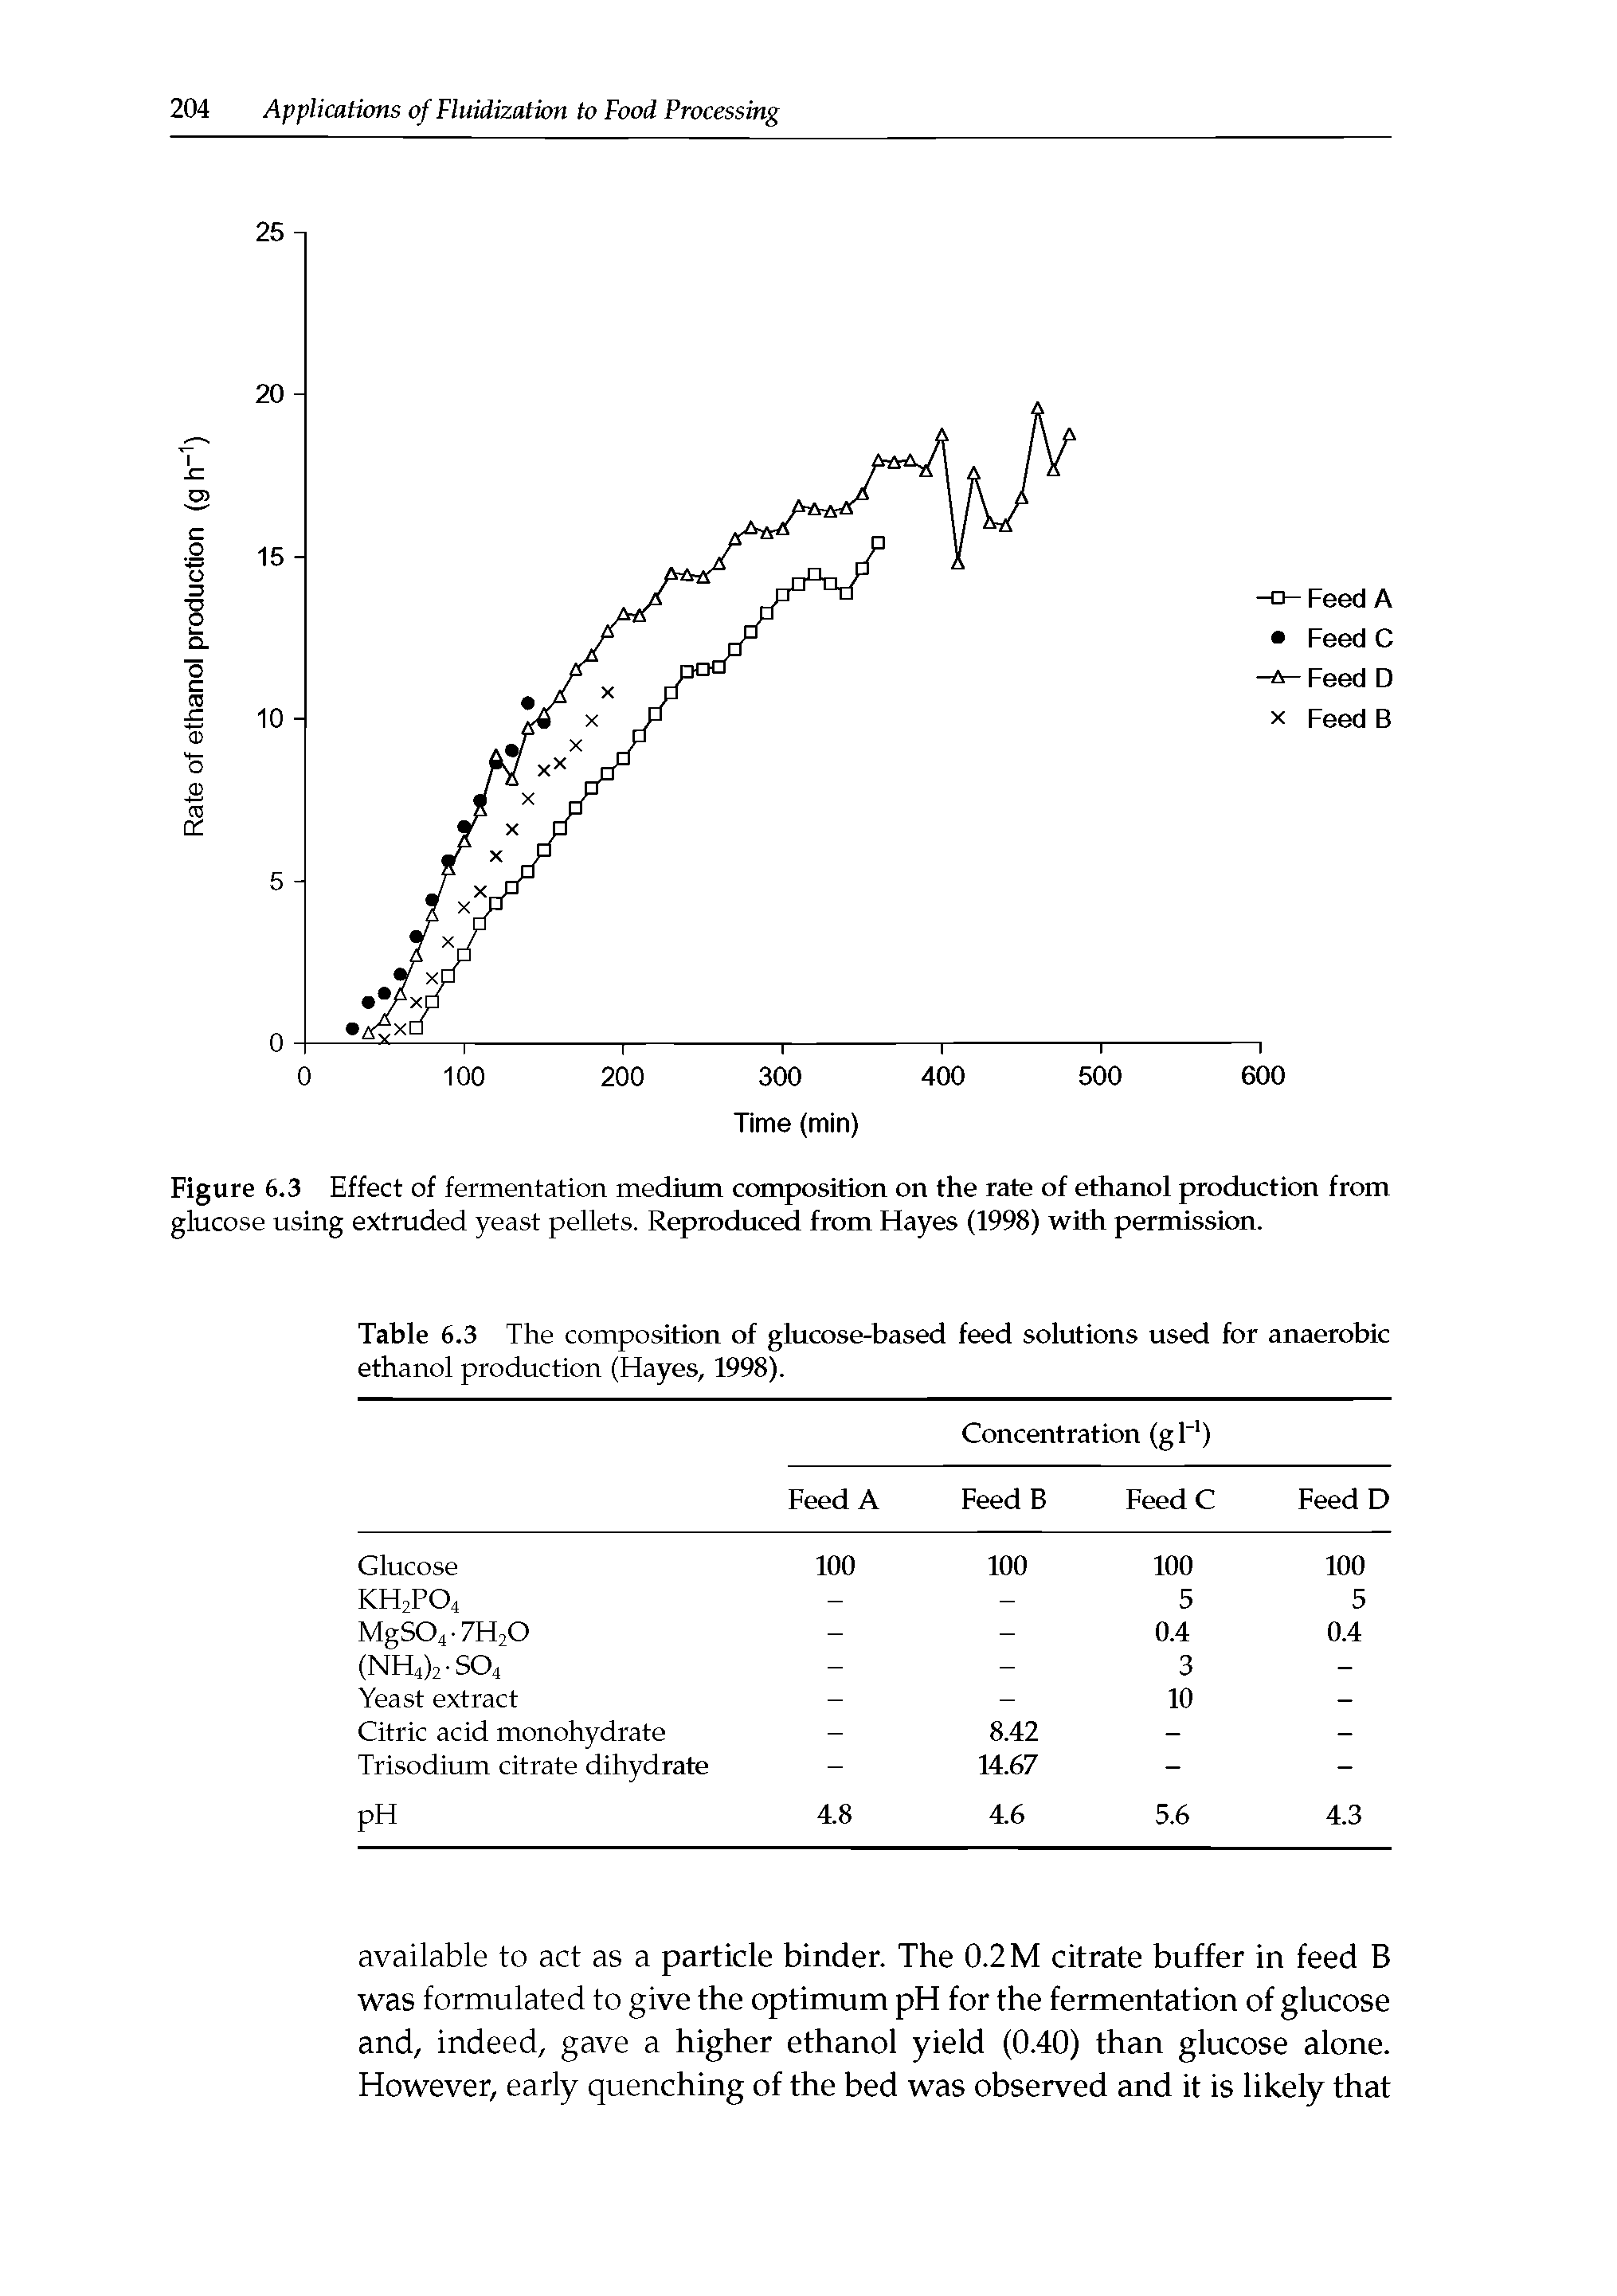 Figure 6.3 Effect of fermentation medium composition on the rate of ethanol production from glucose using extruded yeast pellets. Reproduced from Hayes (1998) with permission.